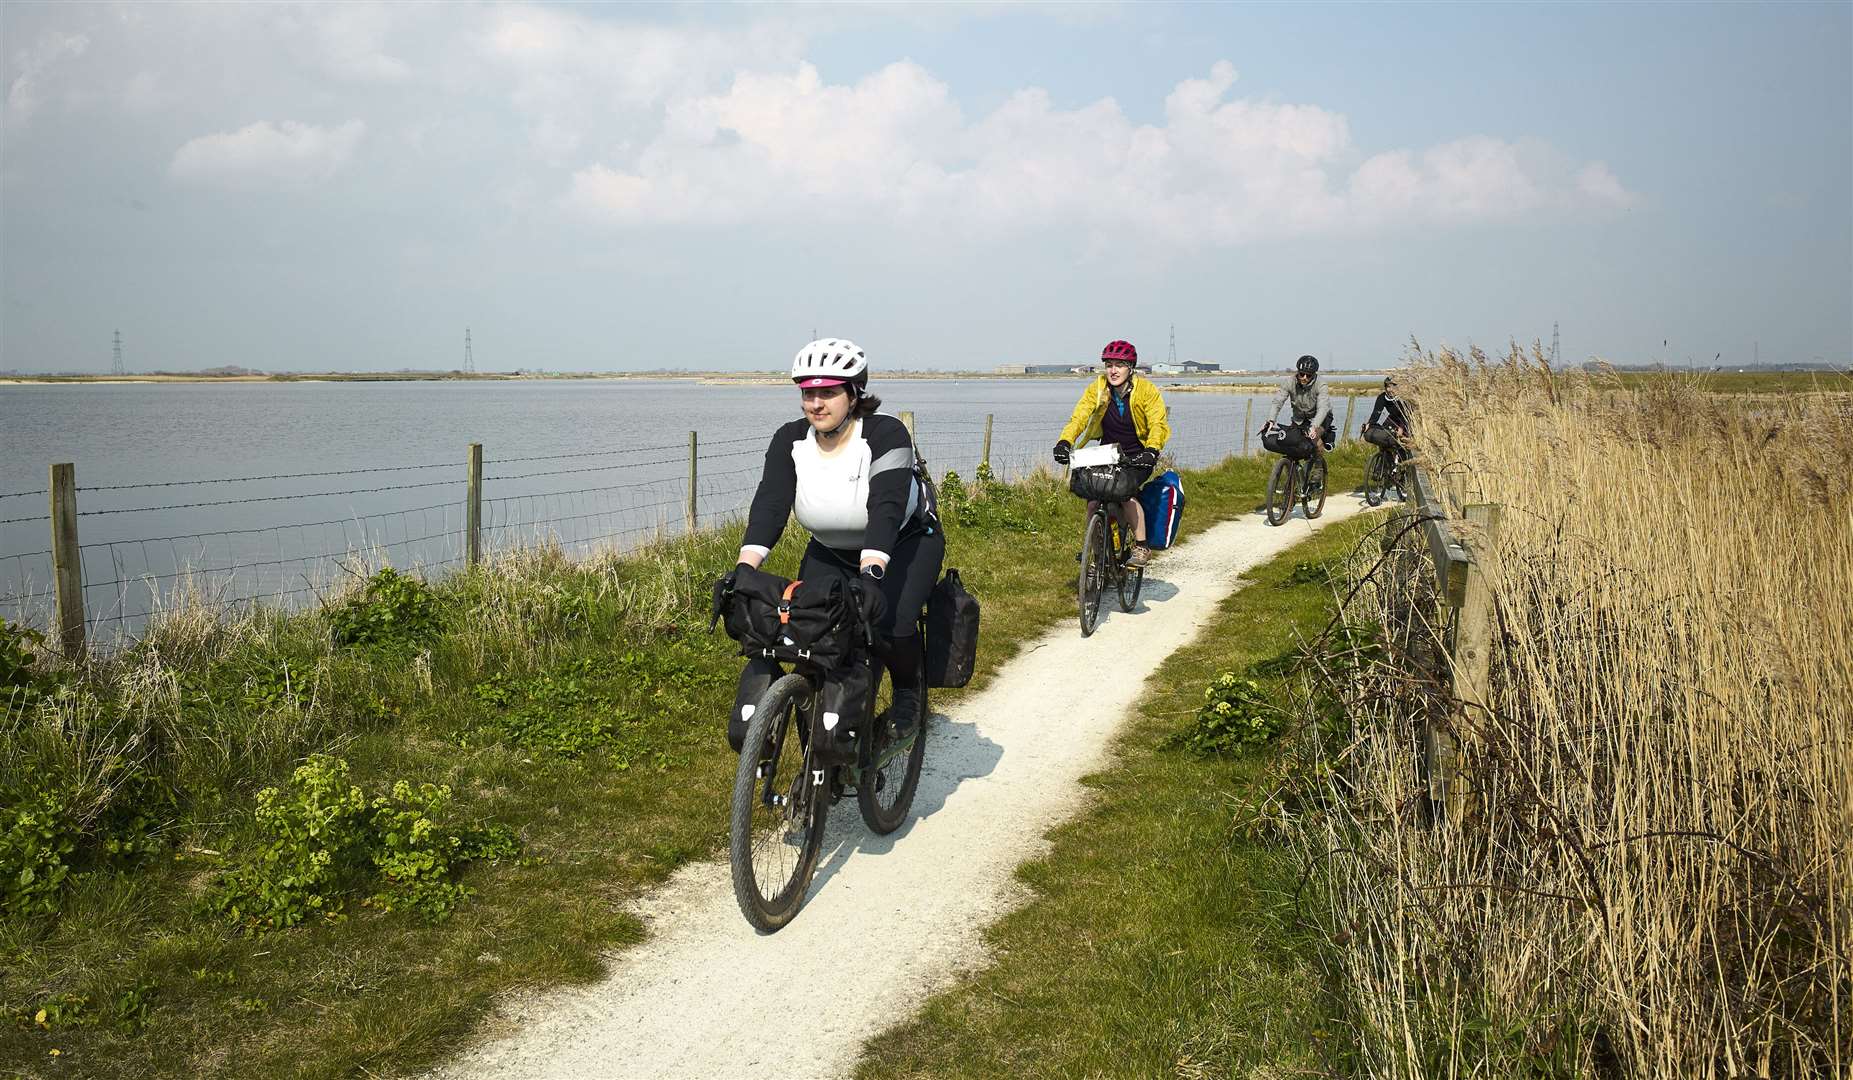 Cyclists ride past a lake near Lydd, Kent, on Cycling UK’s Cantii Way route (Cycling UK)